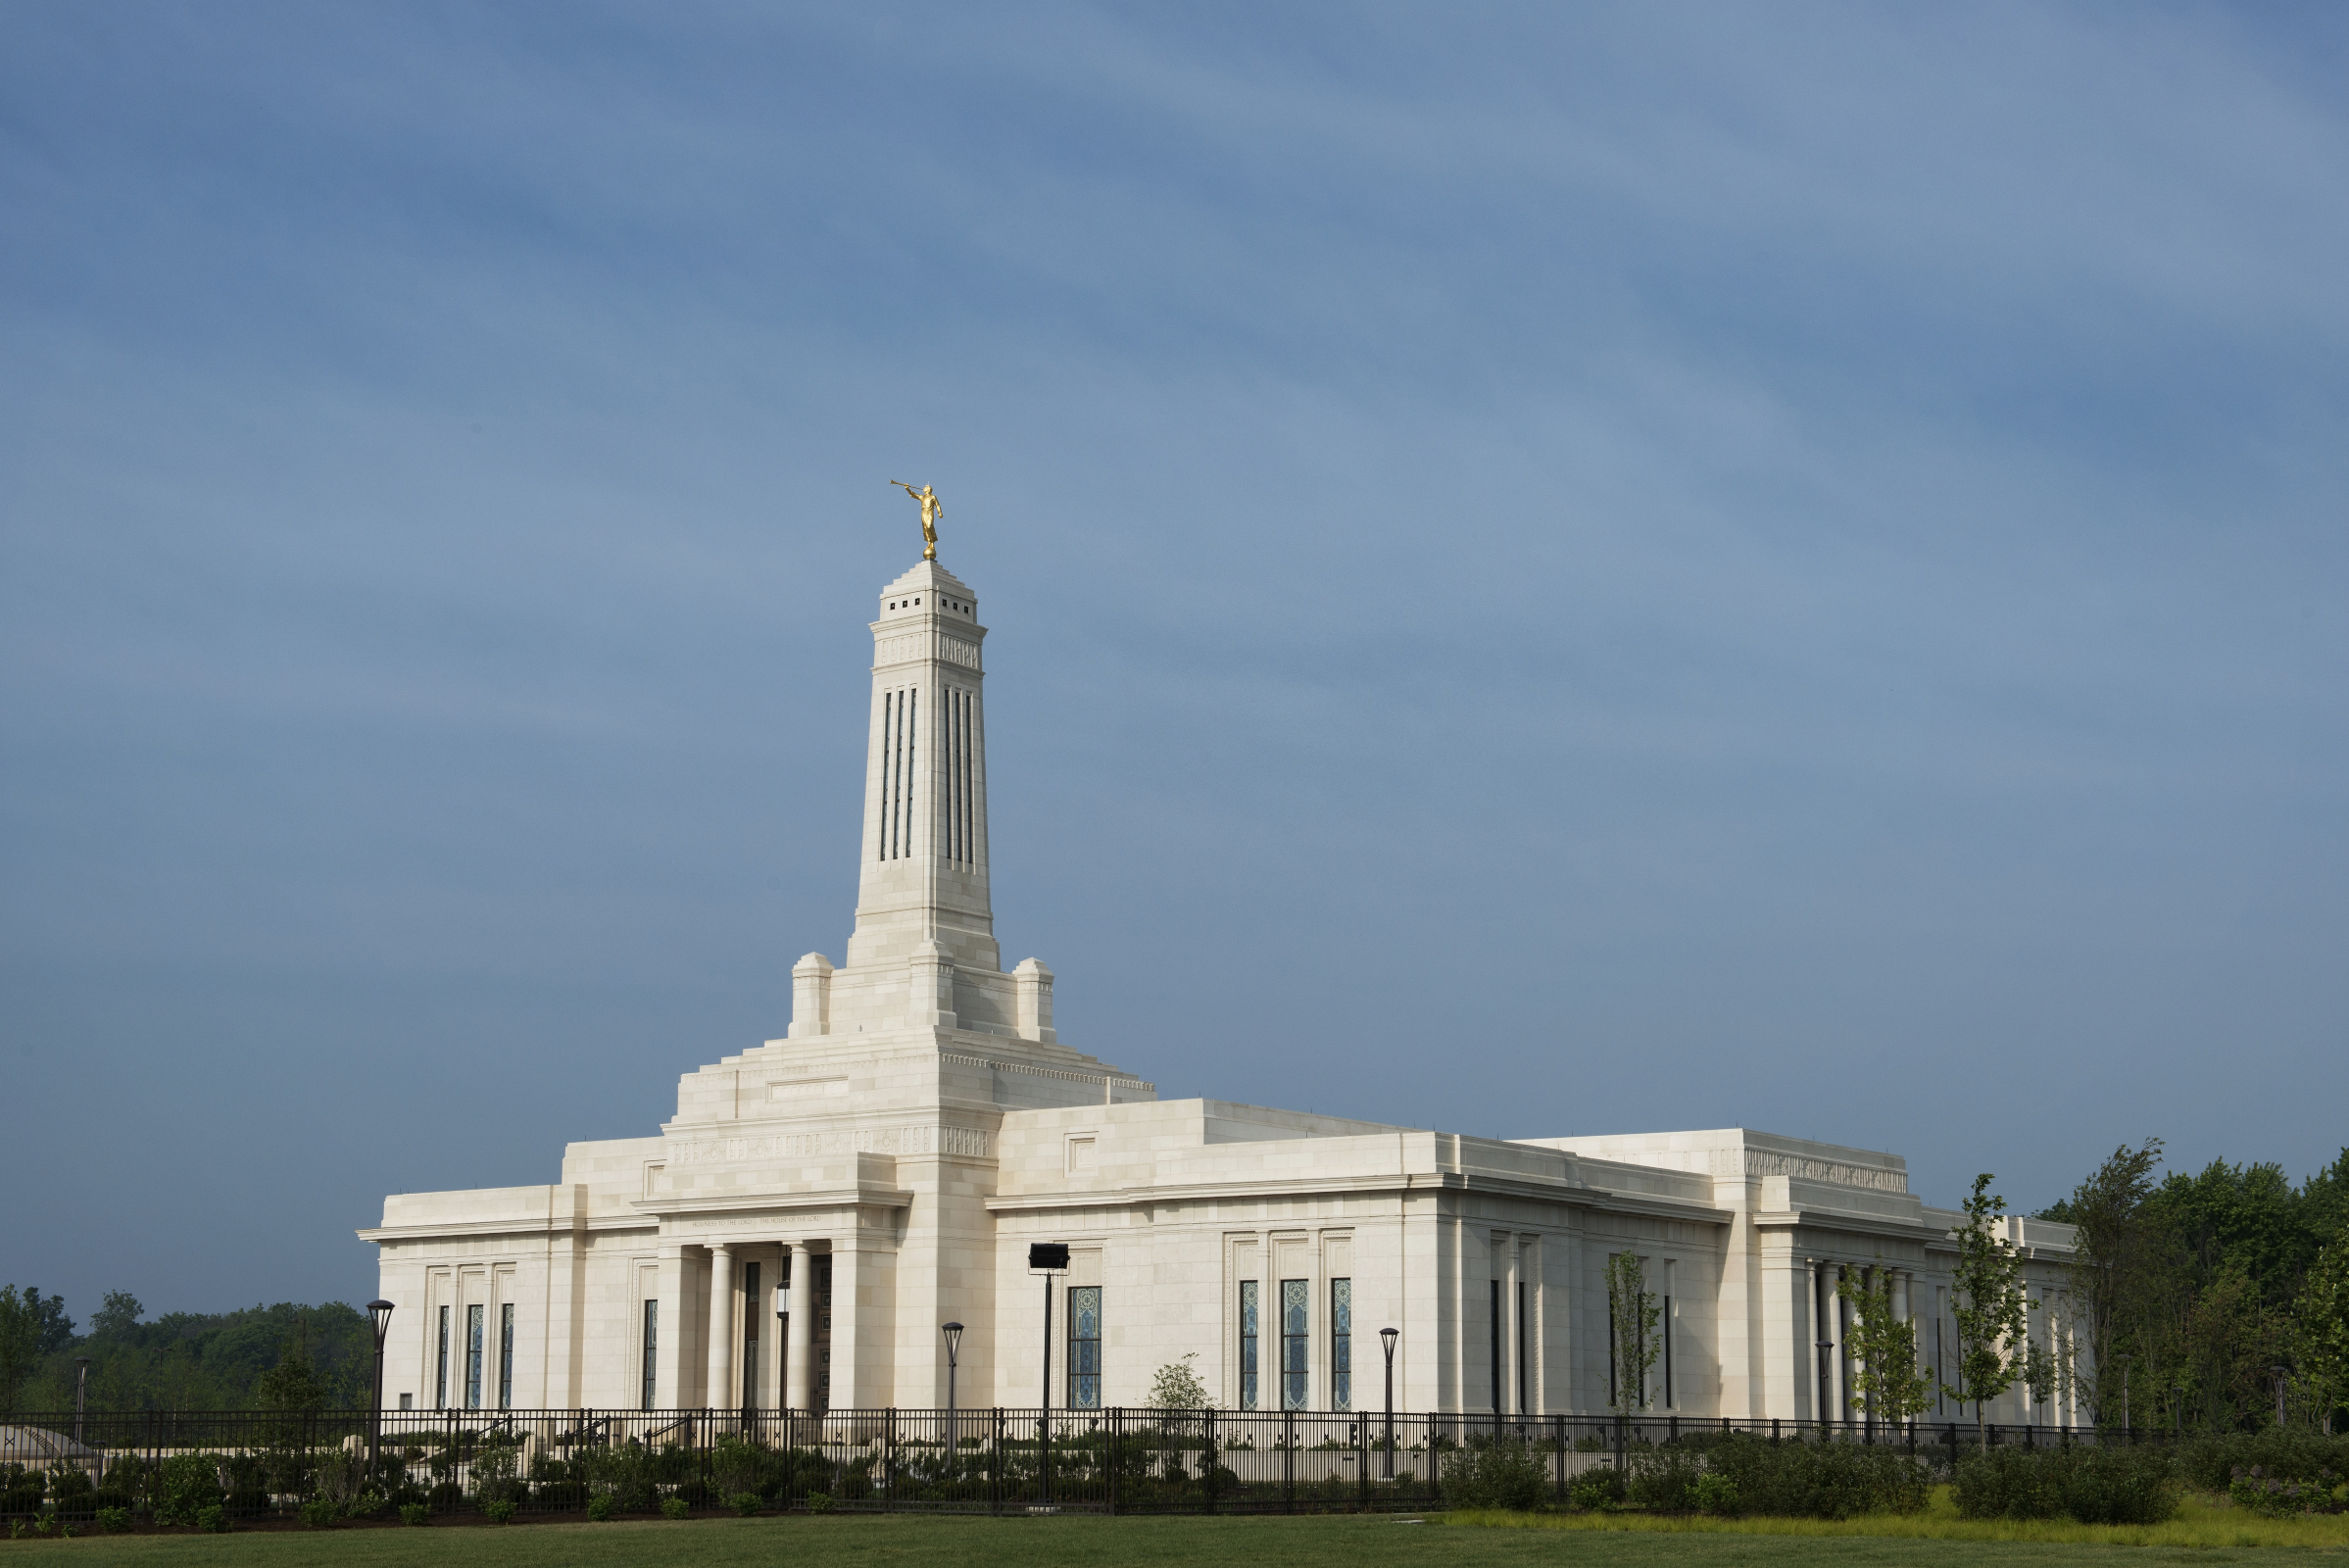 The Church of Jesus Christ of Latter-day Saints | 14340 Donovan Rd, Oregon City, OR, 97045 | +1 (503) 655-9908